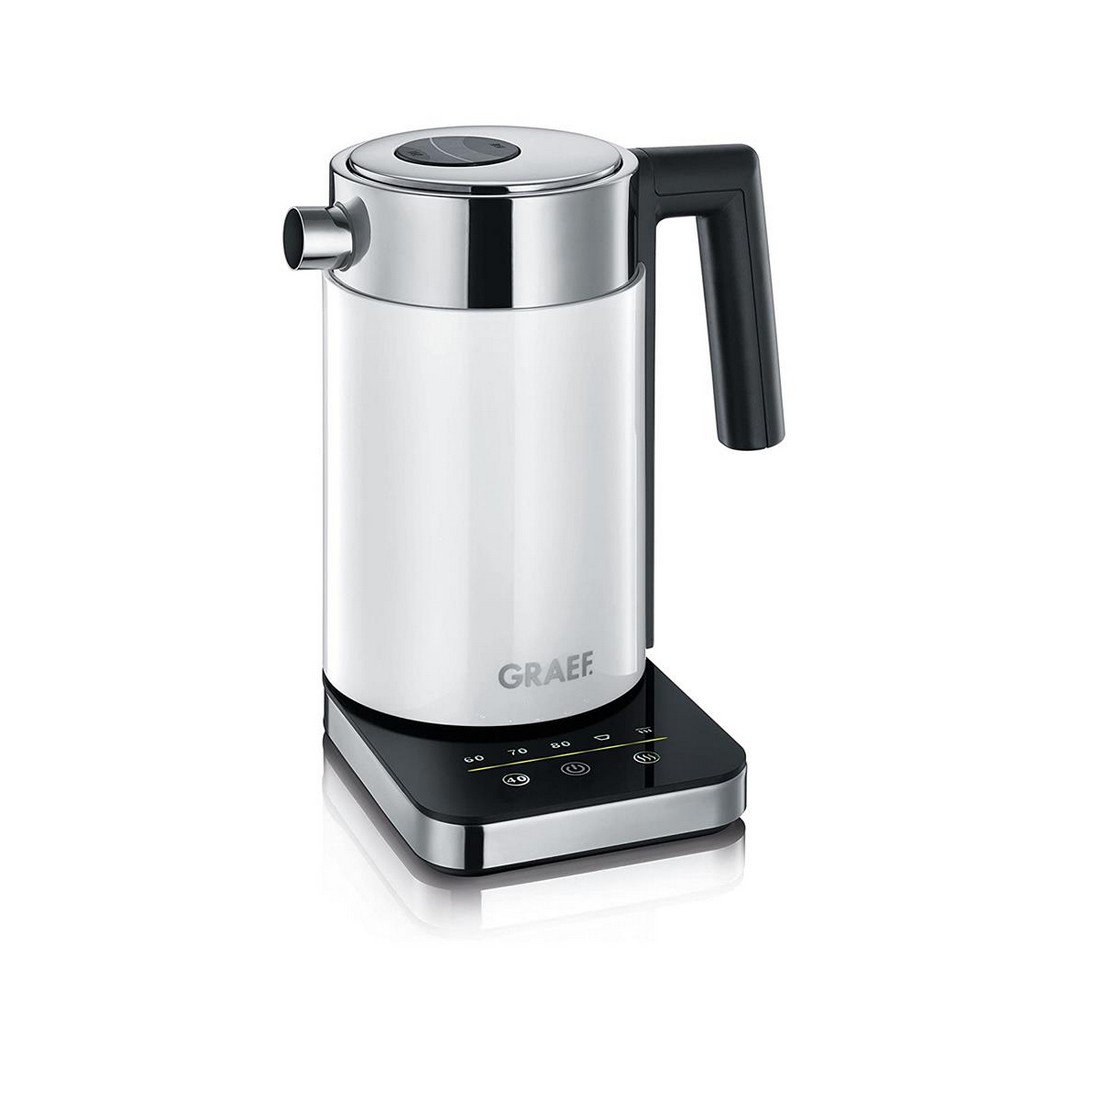 kettle wk 501 wh